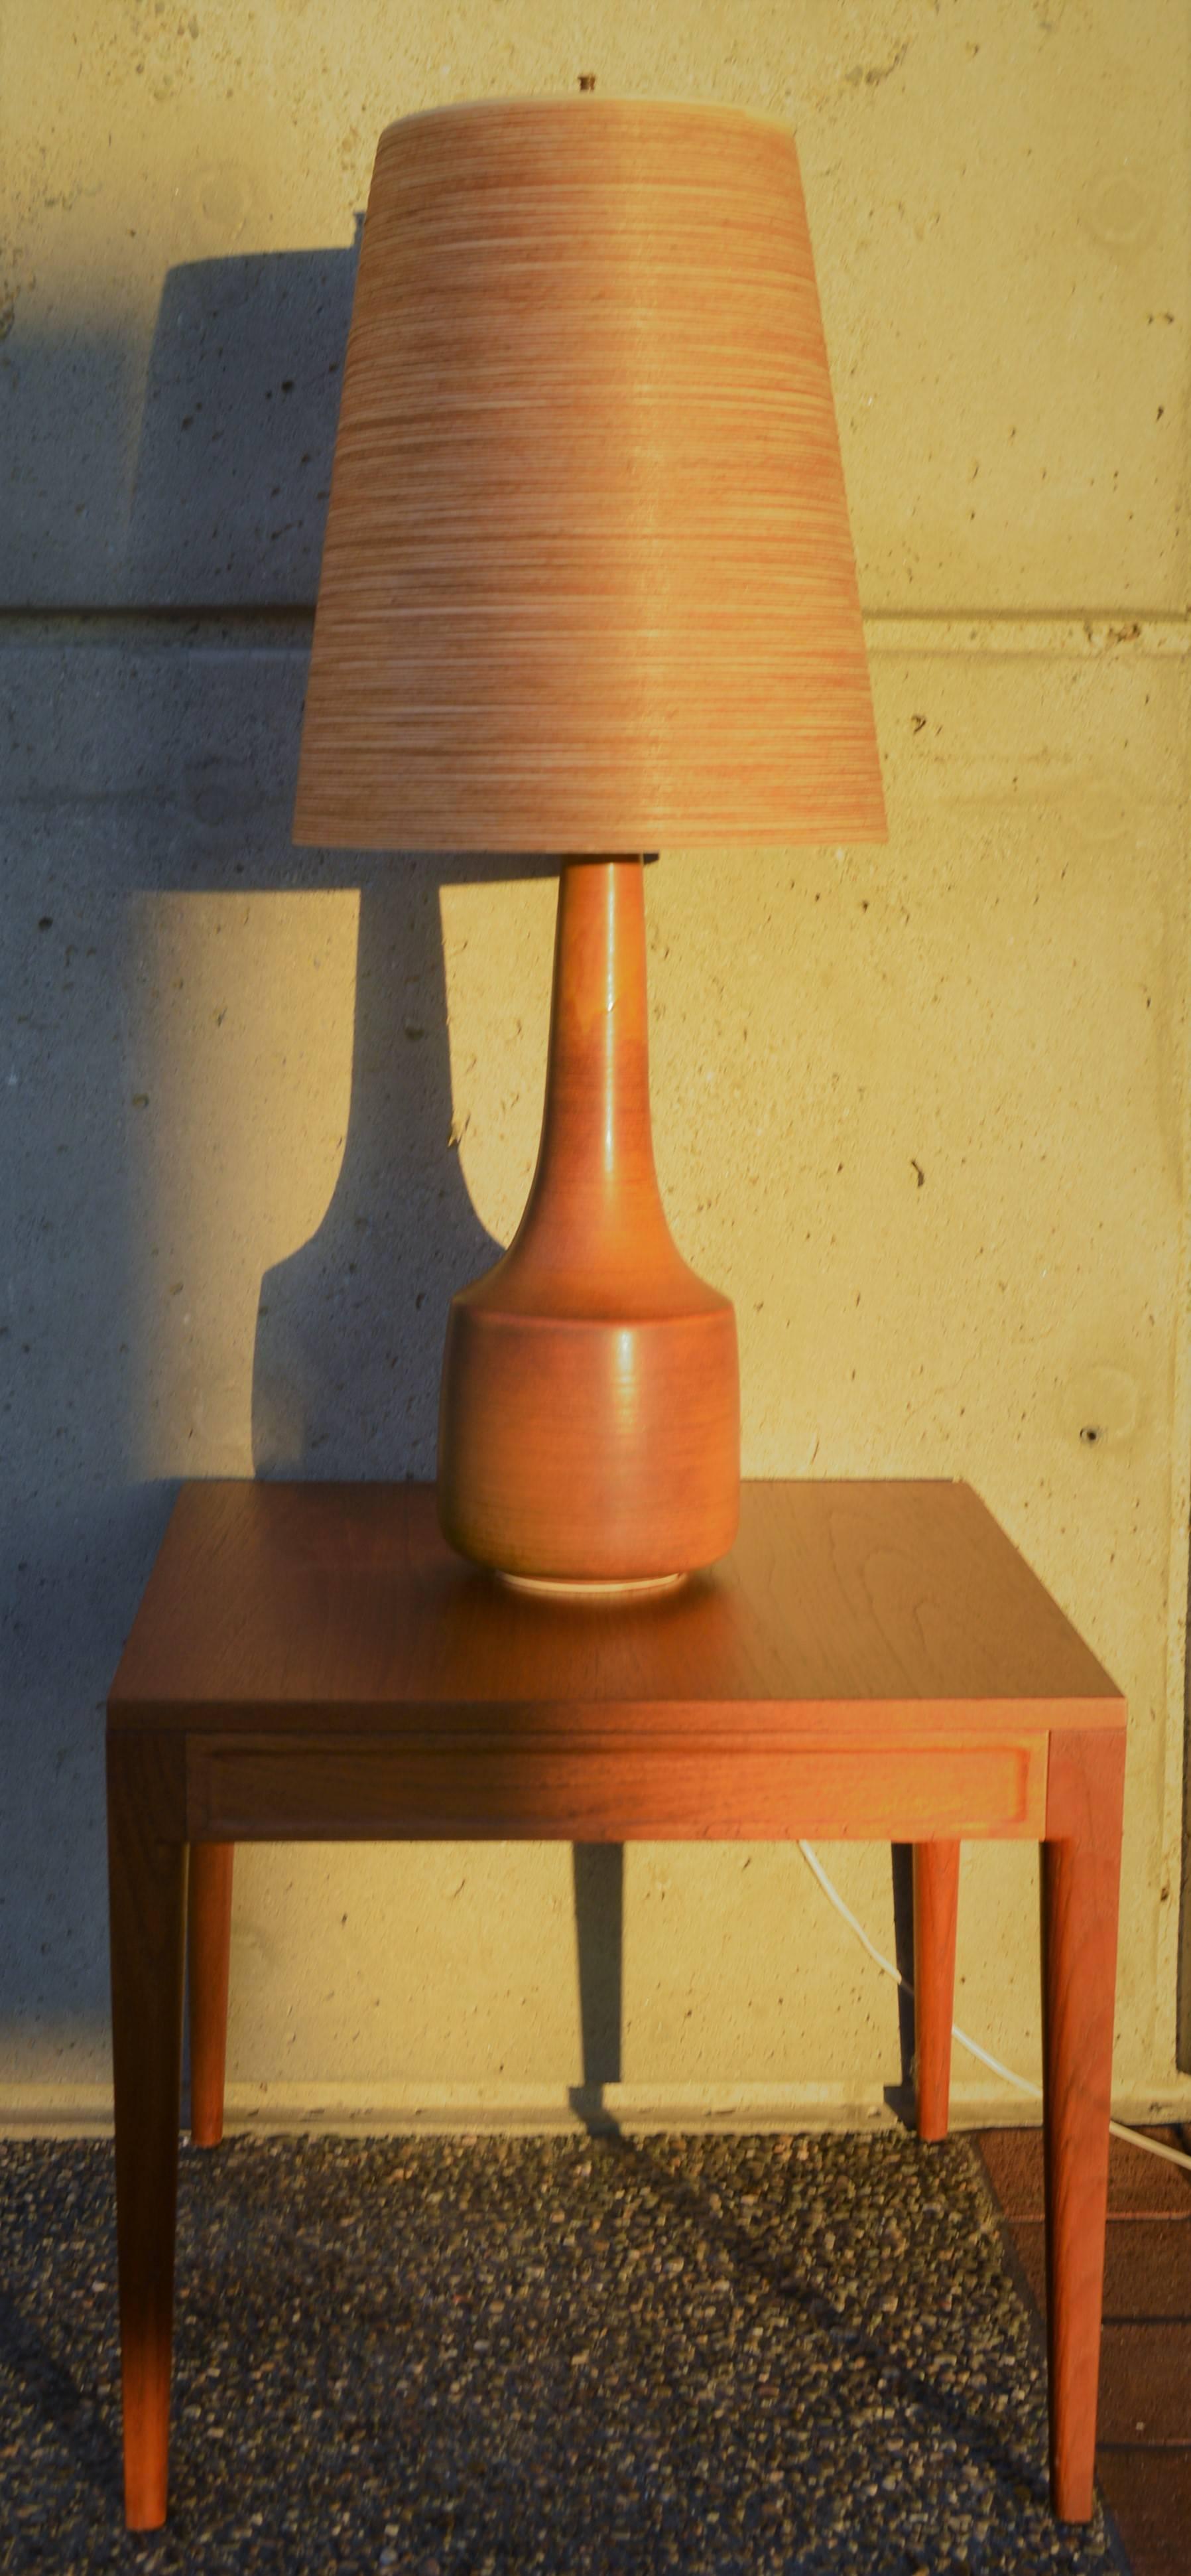 This early and stunning tall ceramic cylinder lamp was handcrafted in the 1960s by Danish potters Lotte & Gunnar Bostlund. The subtle glazing variations and striping of the brown and caramel earth tones is spectacular. Featuring their uniquely